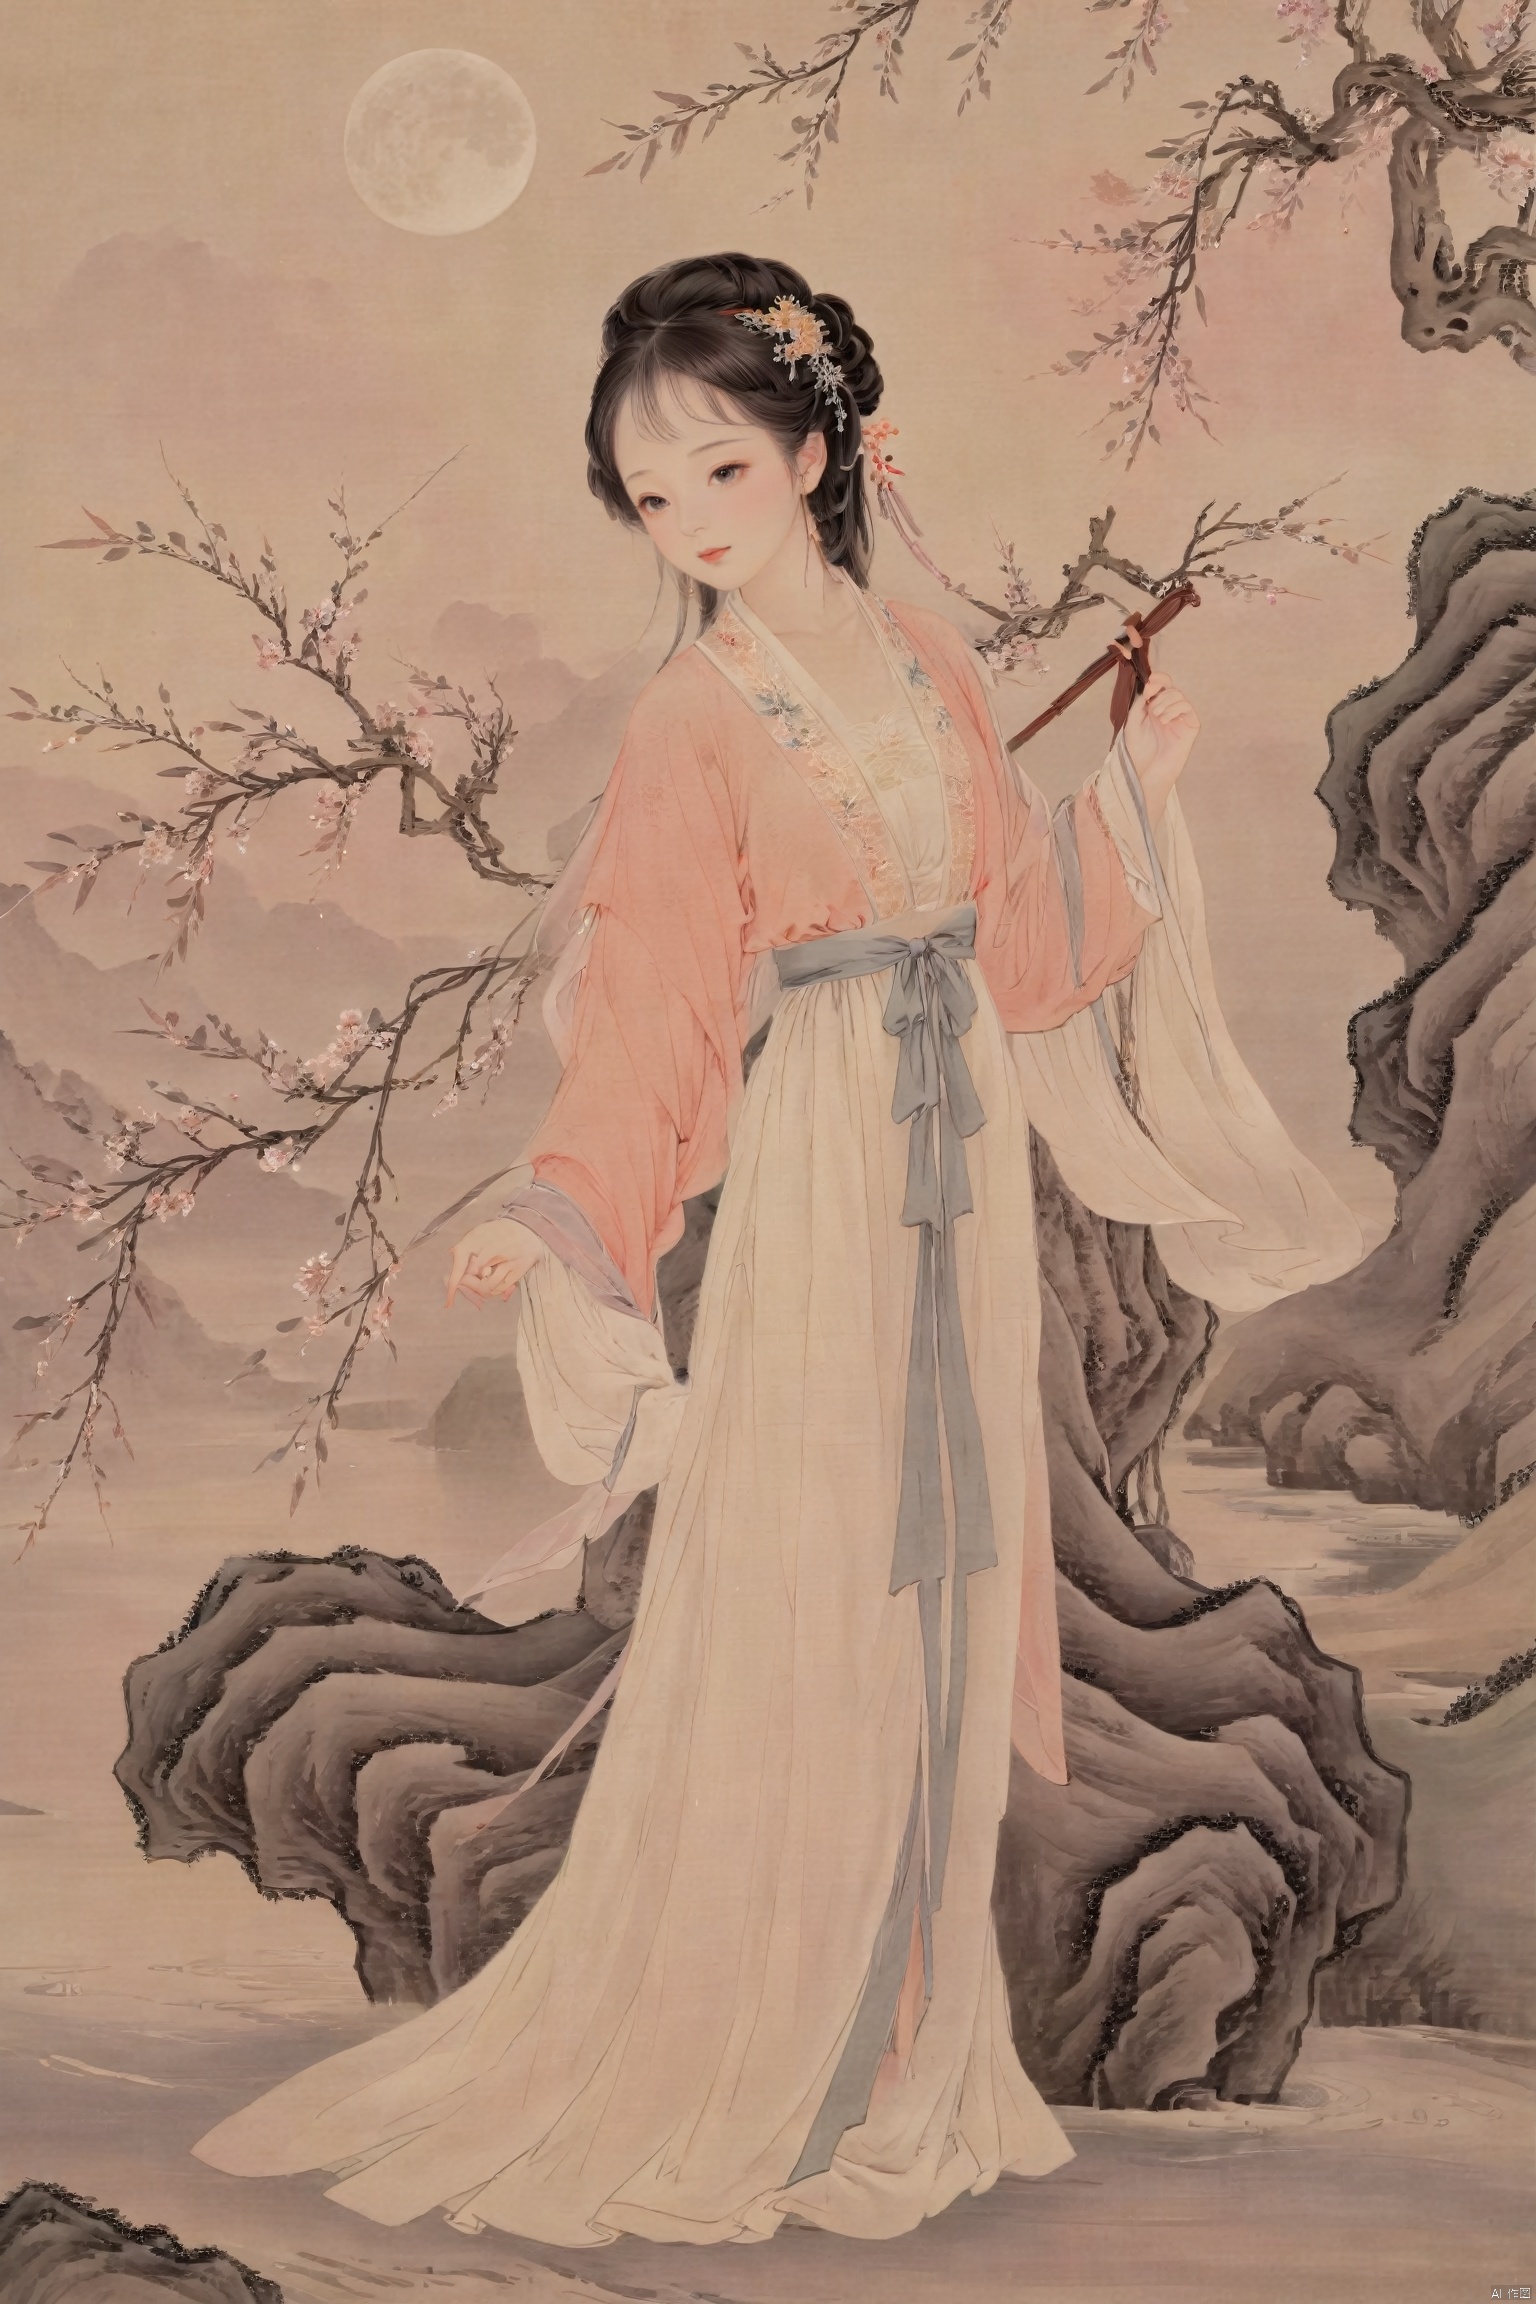 Traditional Chinese painting style, beautiful Chinese woman, elegant hanfu dress, flowing silk robe, delicate facial features, graceful posture, serene expression, traditional hairstyle with hairpin, standing beneath a willow tree, moon rising above, soft pastel colors, detailed background with evening sky, poetic atmosphere, inspired by ancient Chinese poetry, romantic mood, evening setting, ethereal beauty, (masterpiece: 2), best quality, ultra highres, original, extremely detailed, perfect lighting